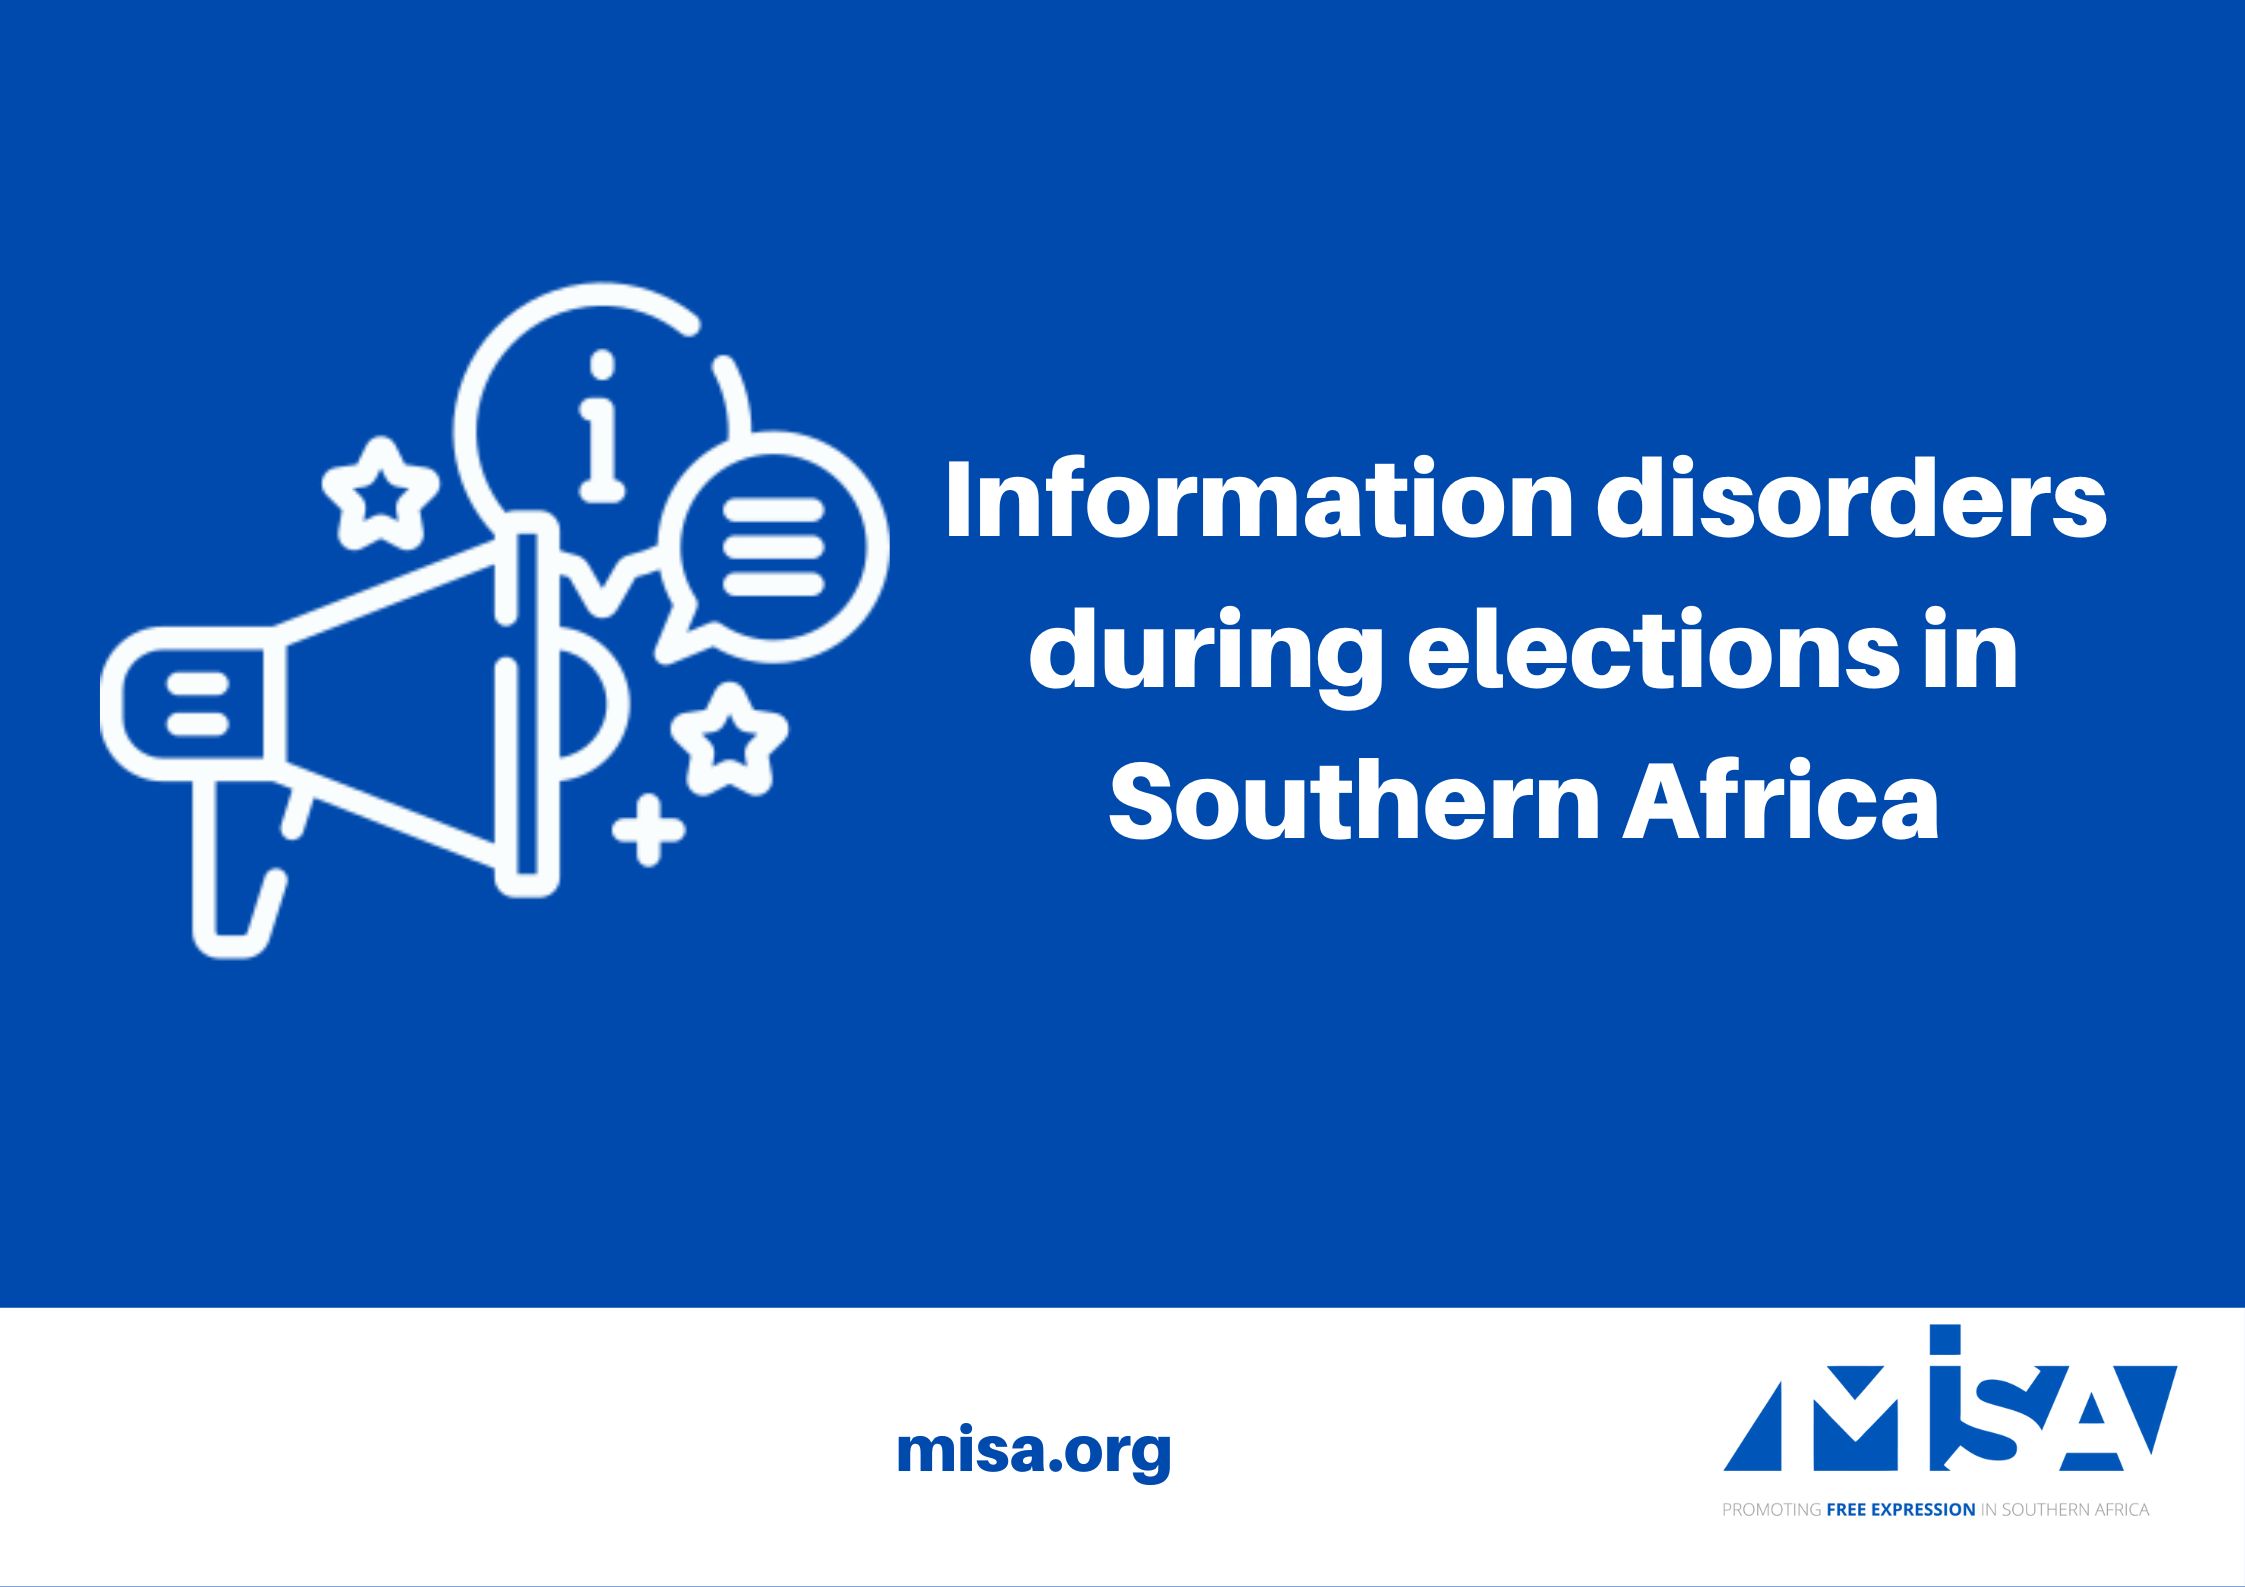 Information disorders during elections in Southern Africa